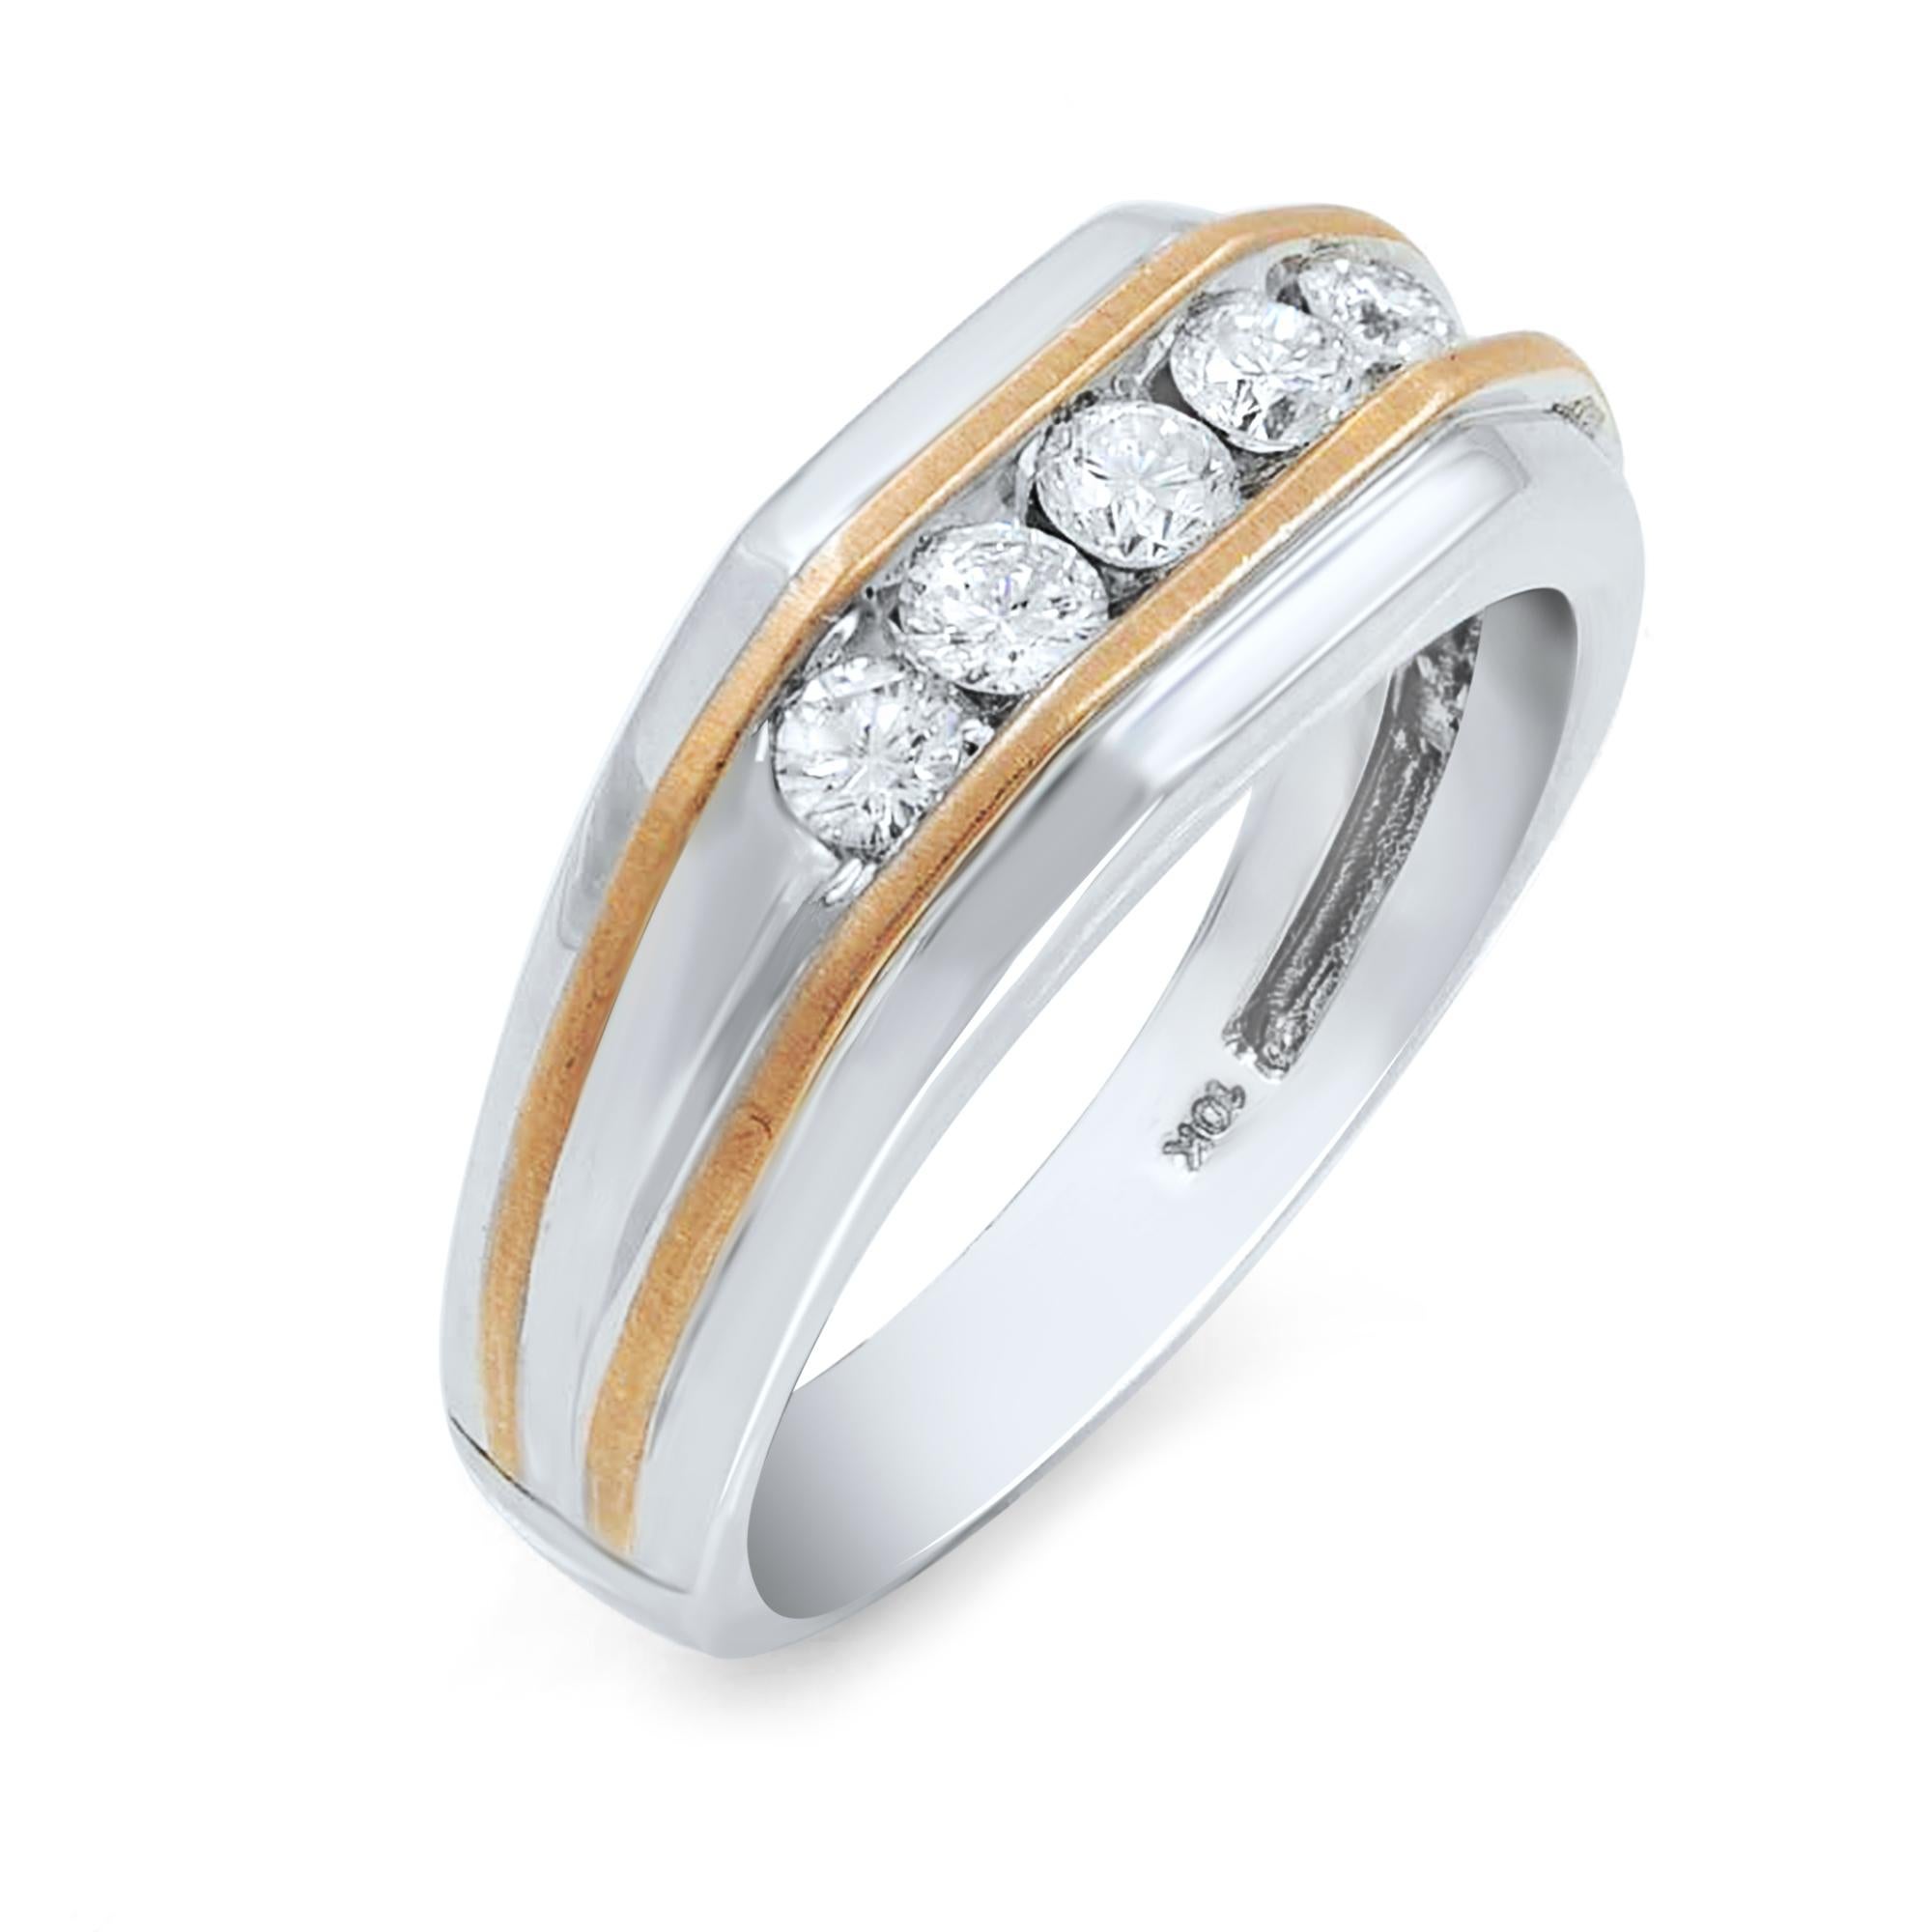 Beautiful five stone diamond ring for your loved ones. Diamonds are eye clean with brilliant sparkle. Five round brilliant cut diamonds channel set on top of the band. Two gold groves add a nice touch of modern style. Total carat weight: 0.50. Color